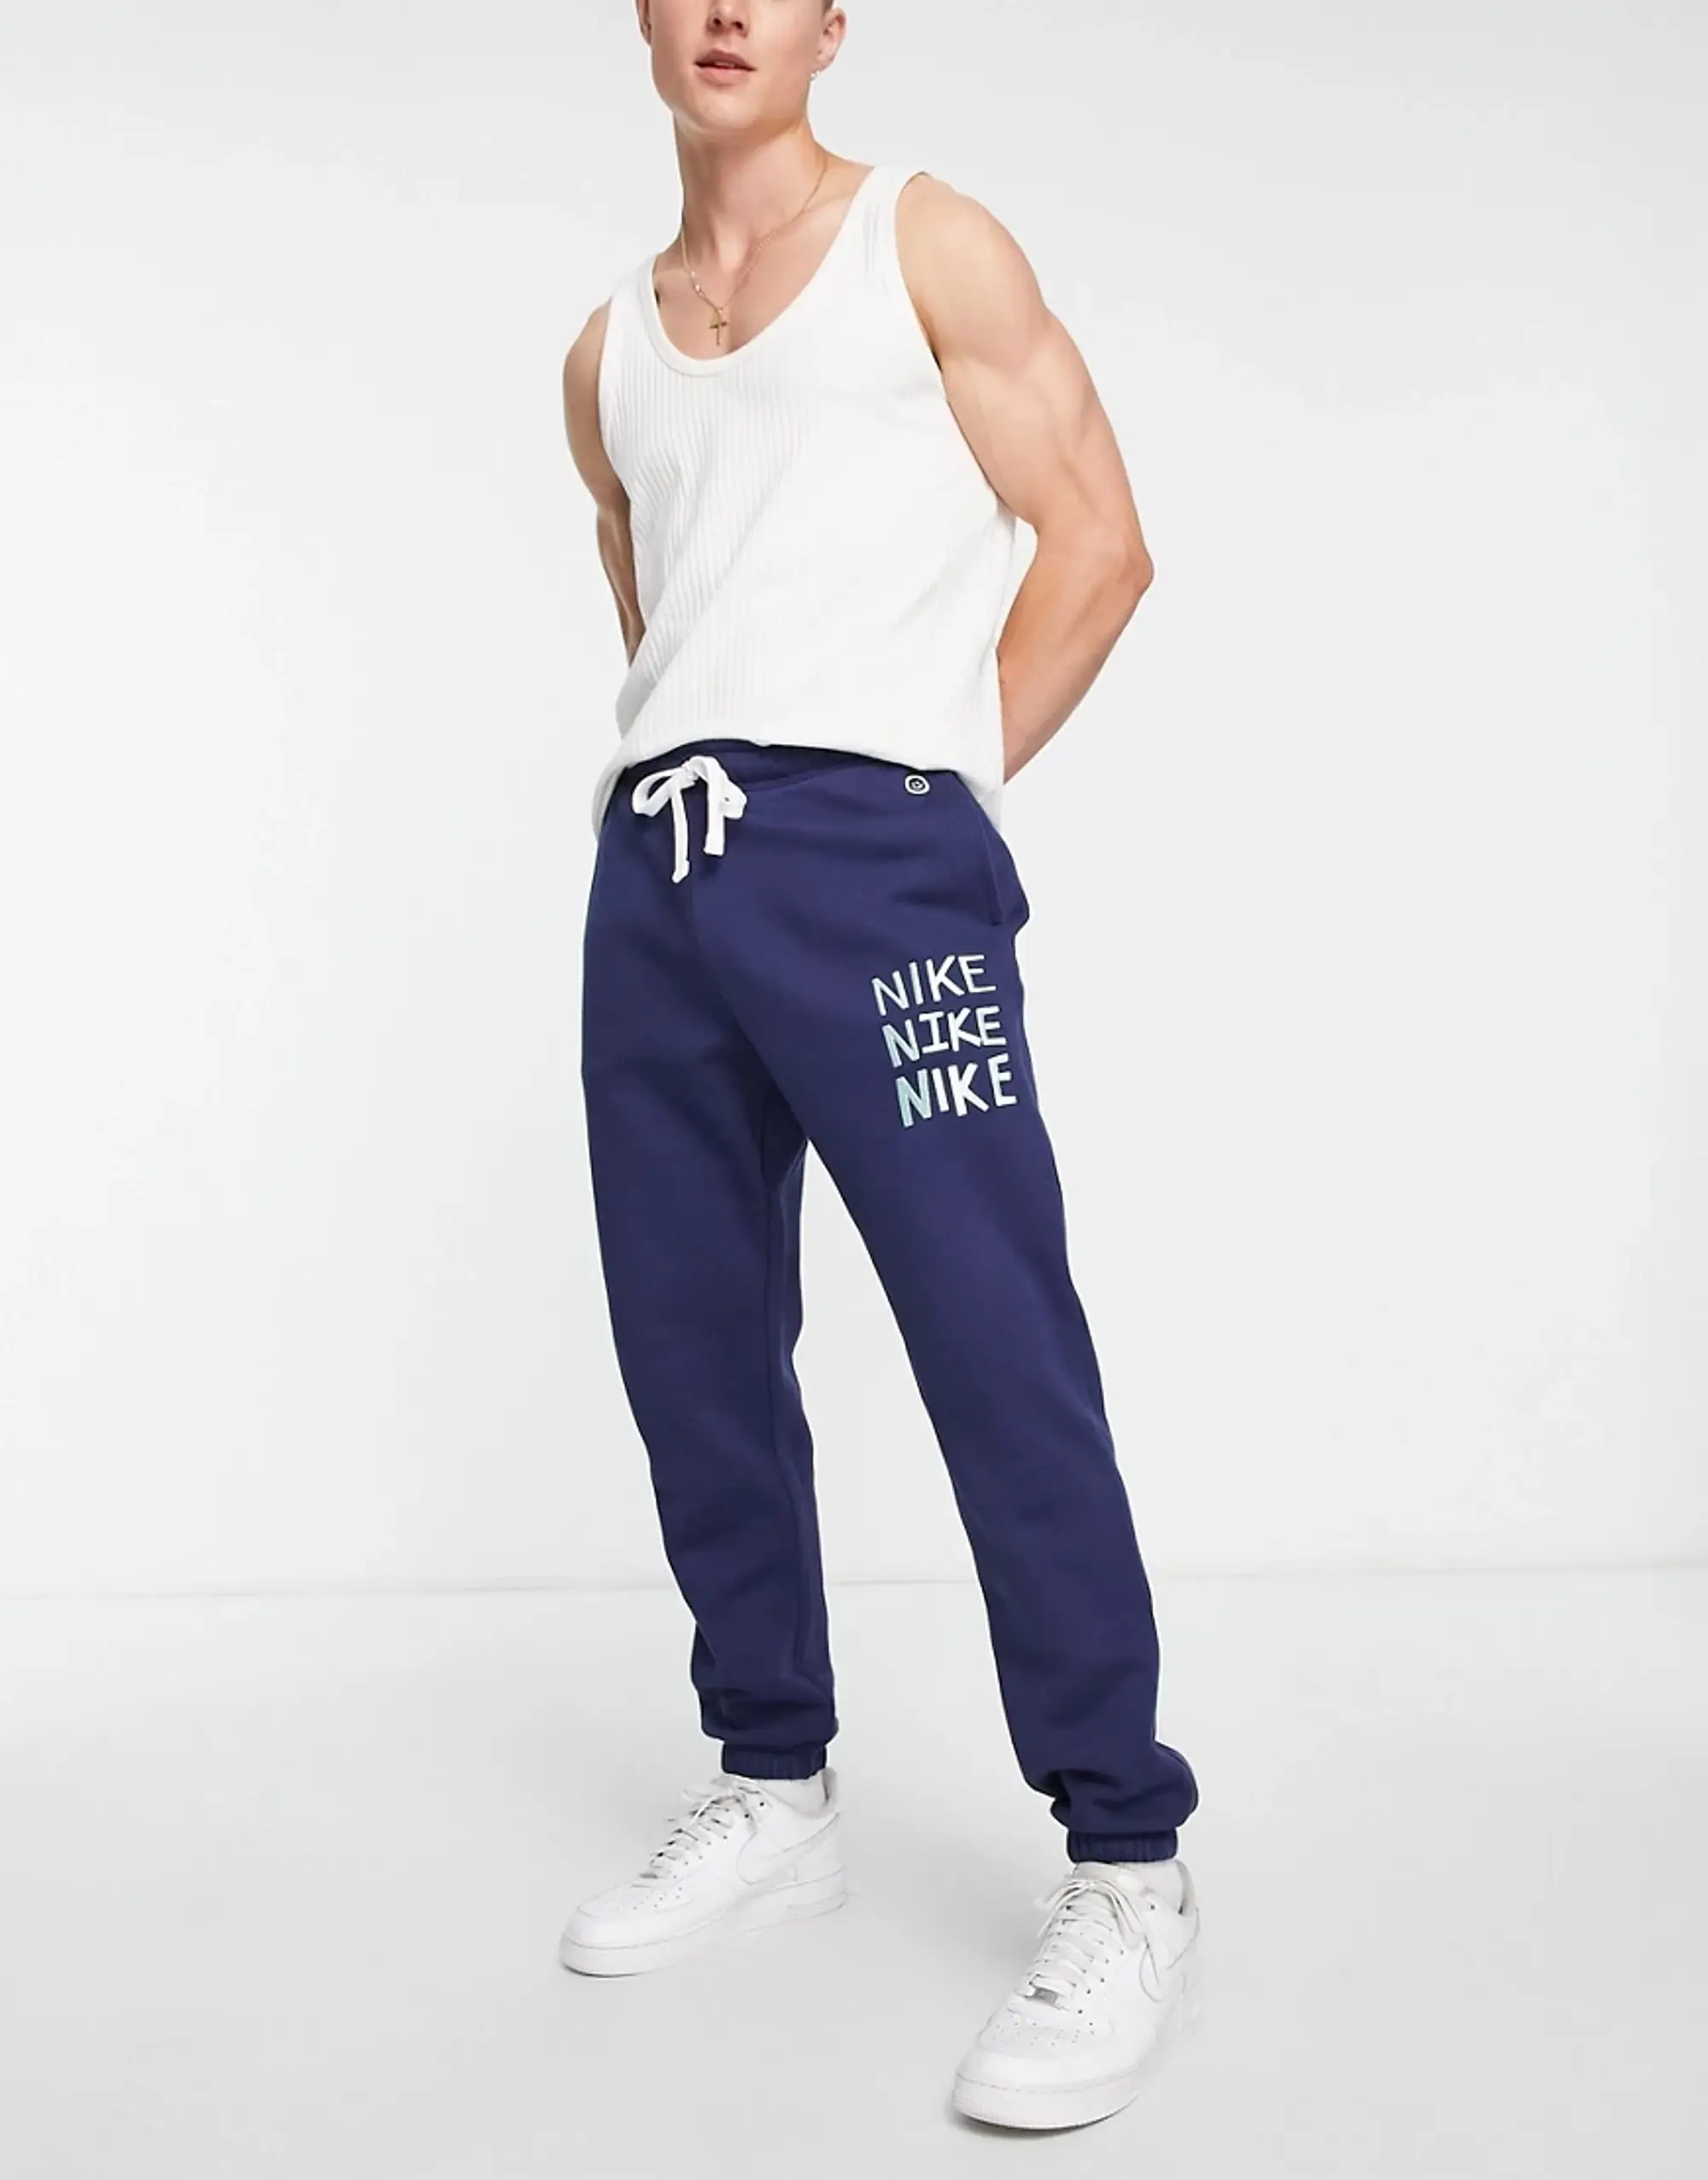 Nike 'Have A Nike Day' Fleece Jogger In Midnight Navy-Blue